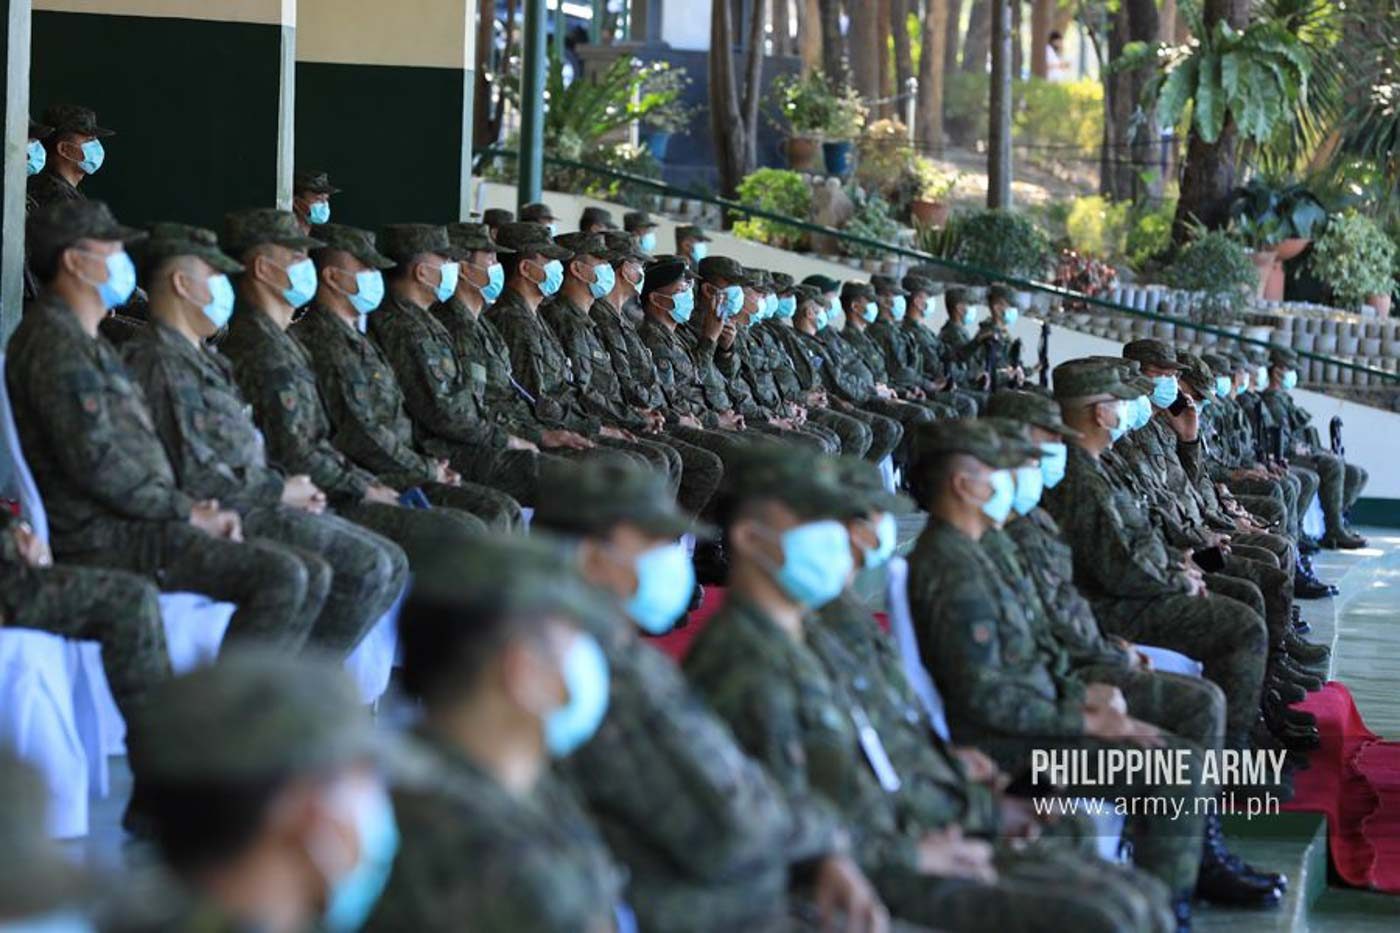 PH Army: Computer programmer recruitment ‘not for malicious purposes’